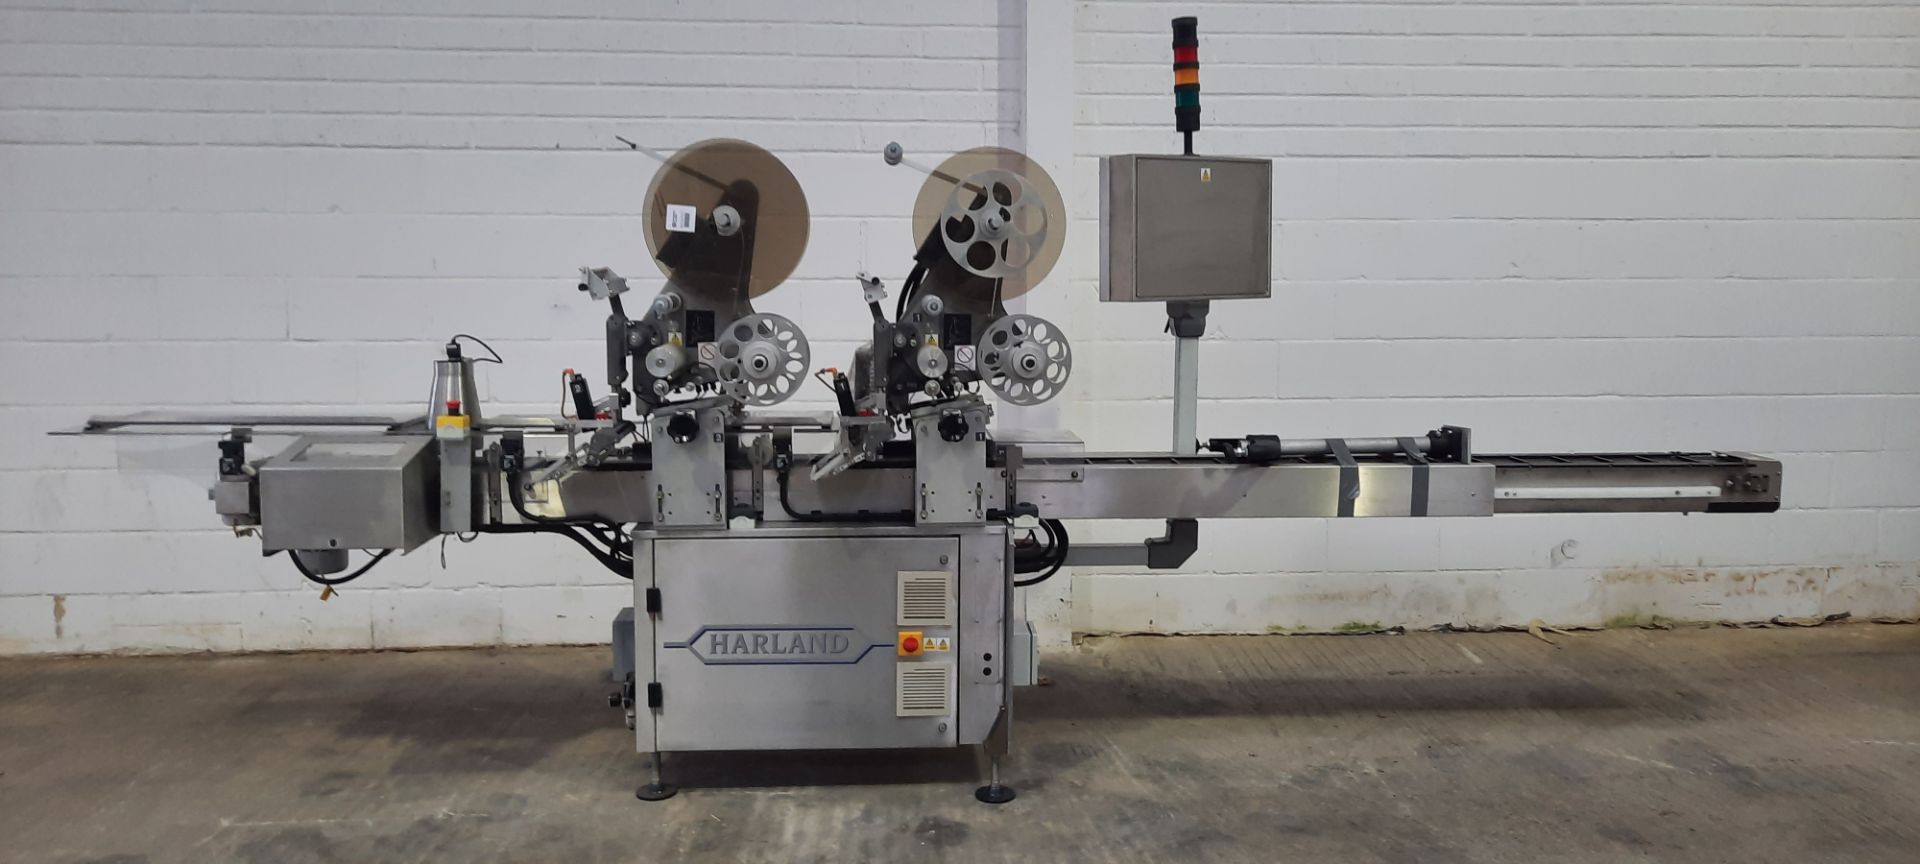 Harland Labeller MK 5 Sirius Automatic 2-Head Top Label Applicator - Image 7 of 10